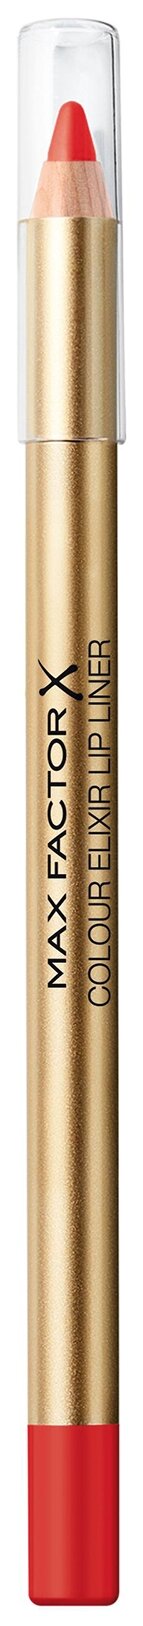 Max Factor    Colour Elixir Lip Liner,  060 red ruby